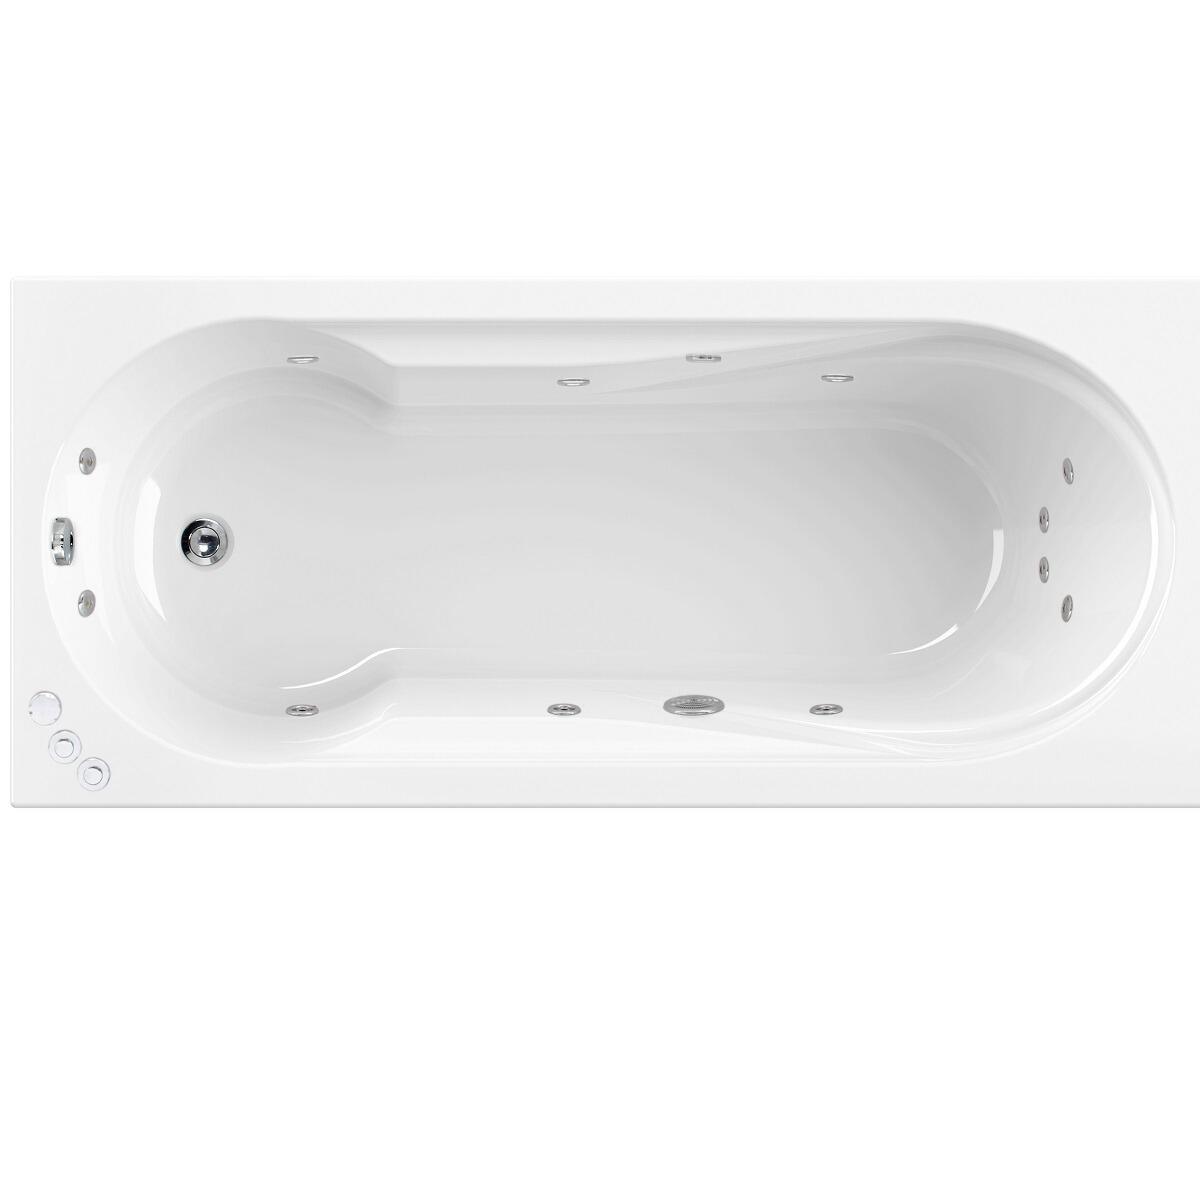 An image of Lisna Waters Modena 1700Mm X 700Mm Single Ended Whirlpool Bath 12 Jet Encore Sy....